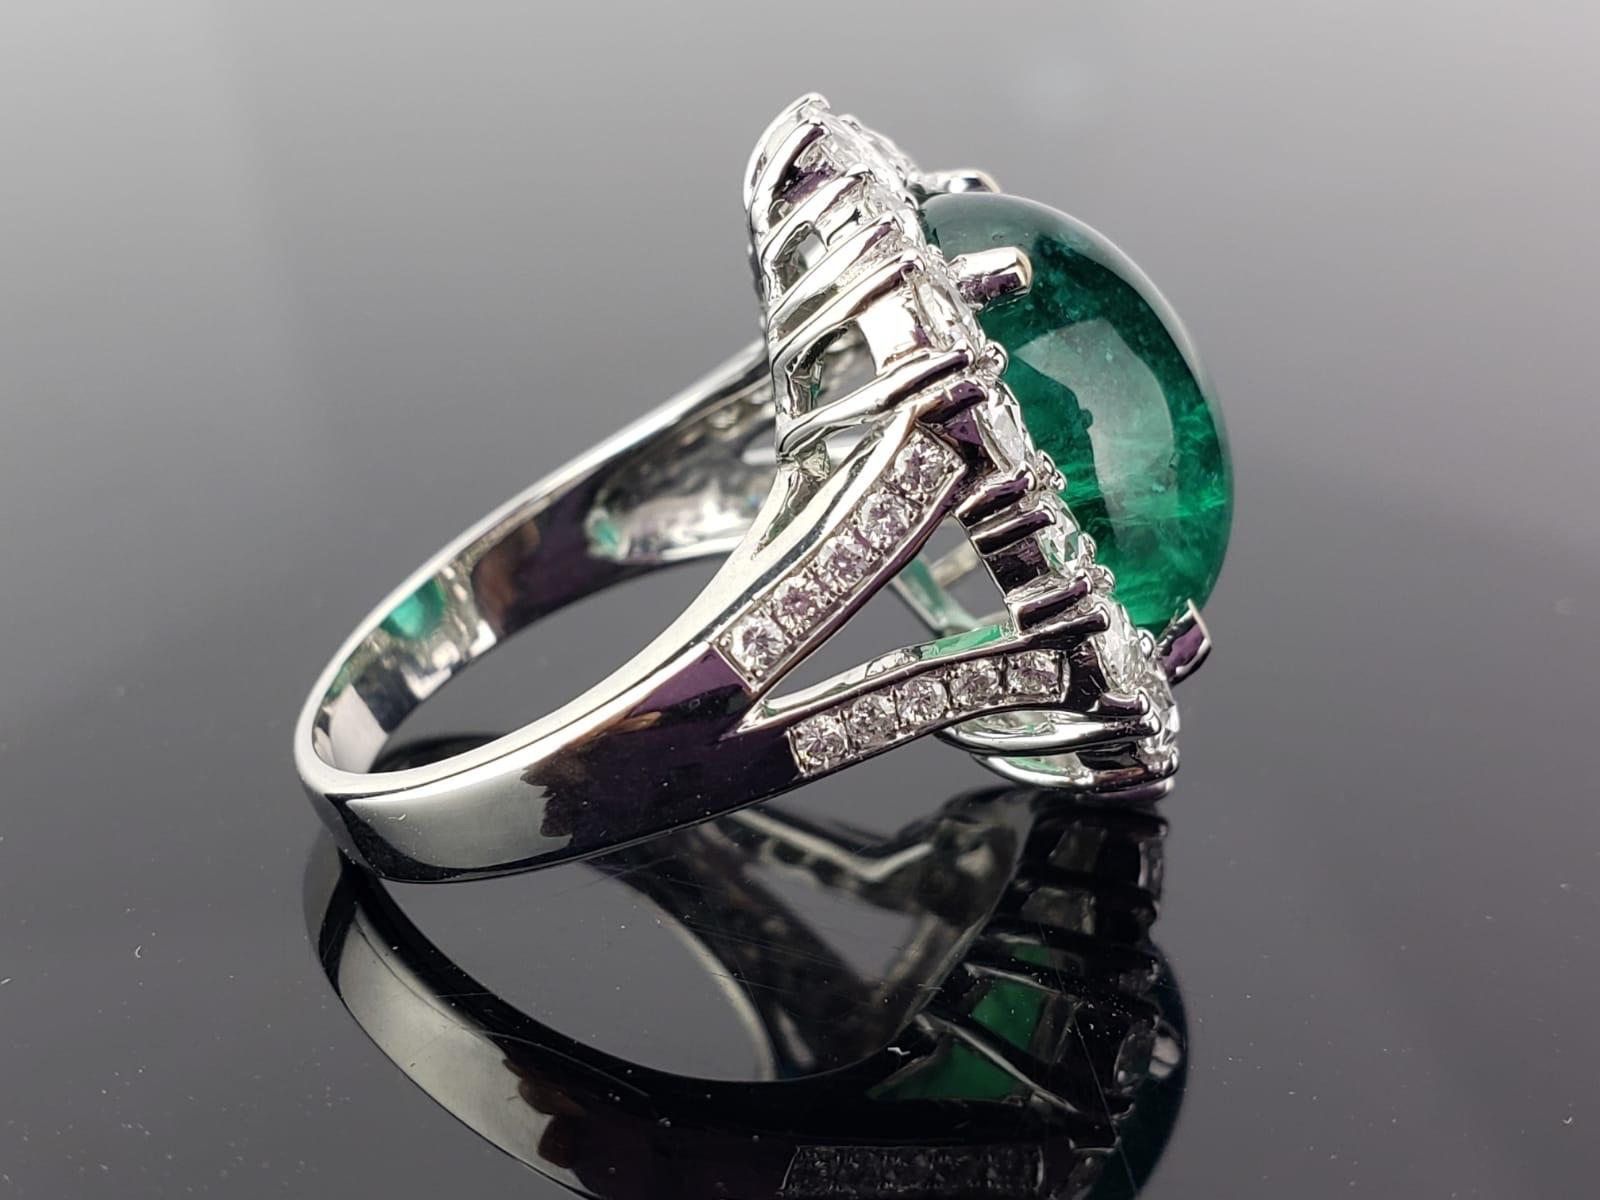 A gorgeous Zambian Emerald stone weighing 9.98 carats of an ideal colour and great lustre, completely transparent with very few naturally occuring inclusions. The Emerald and Diamonds all set in solid 18K White Gold. Free shipping provided.